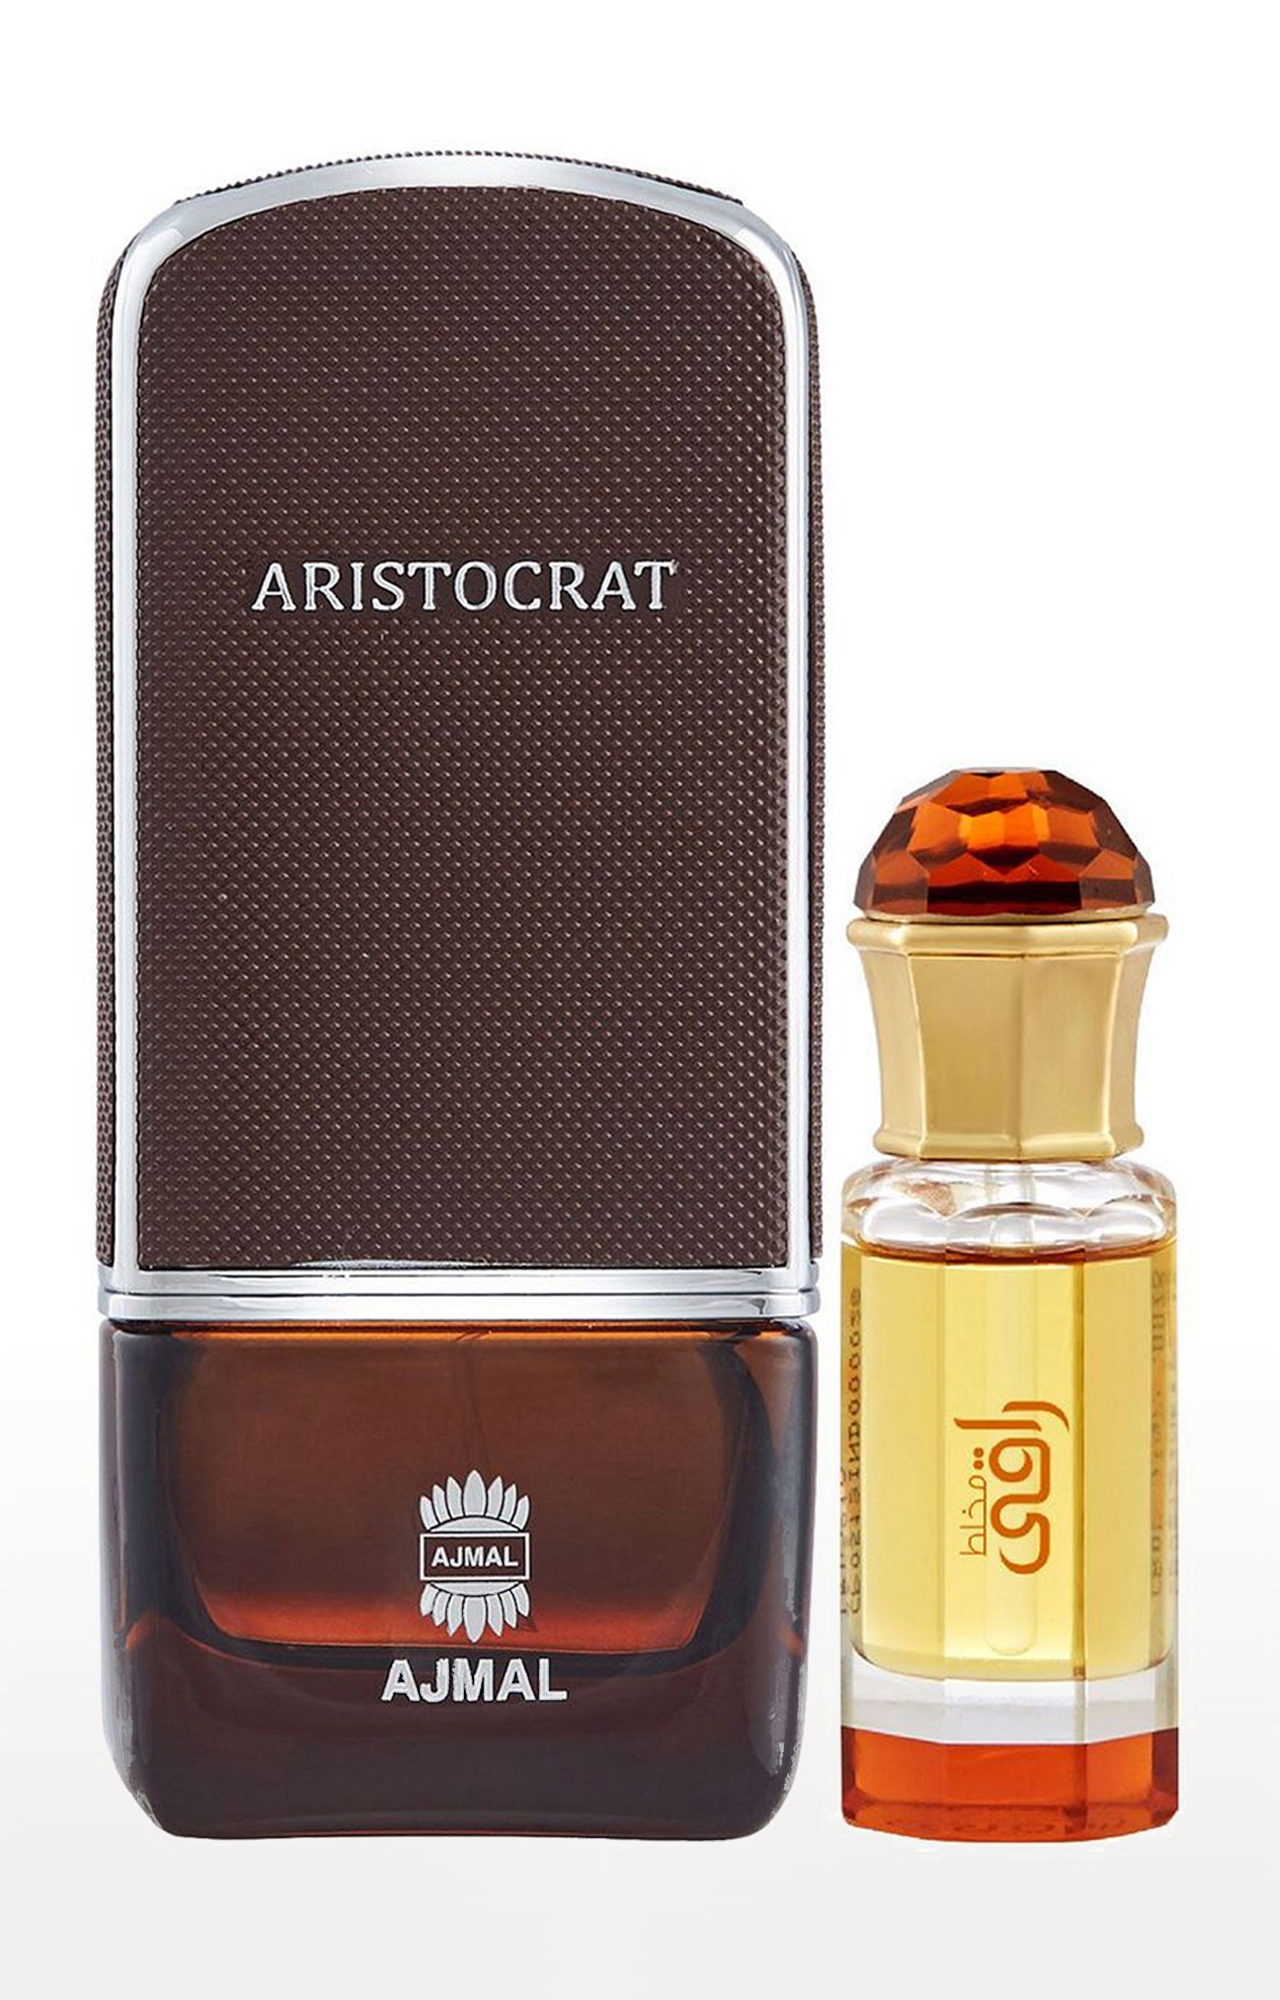 Ajmal | Ajmal Aristocrat EDP Perfume 75ml for Men and Mukhallat Raaqi Concentrated Perfume Oil Fruity Alcohol-free Attar 10ml for Unisex 0